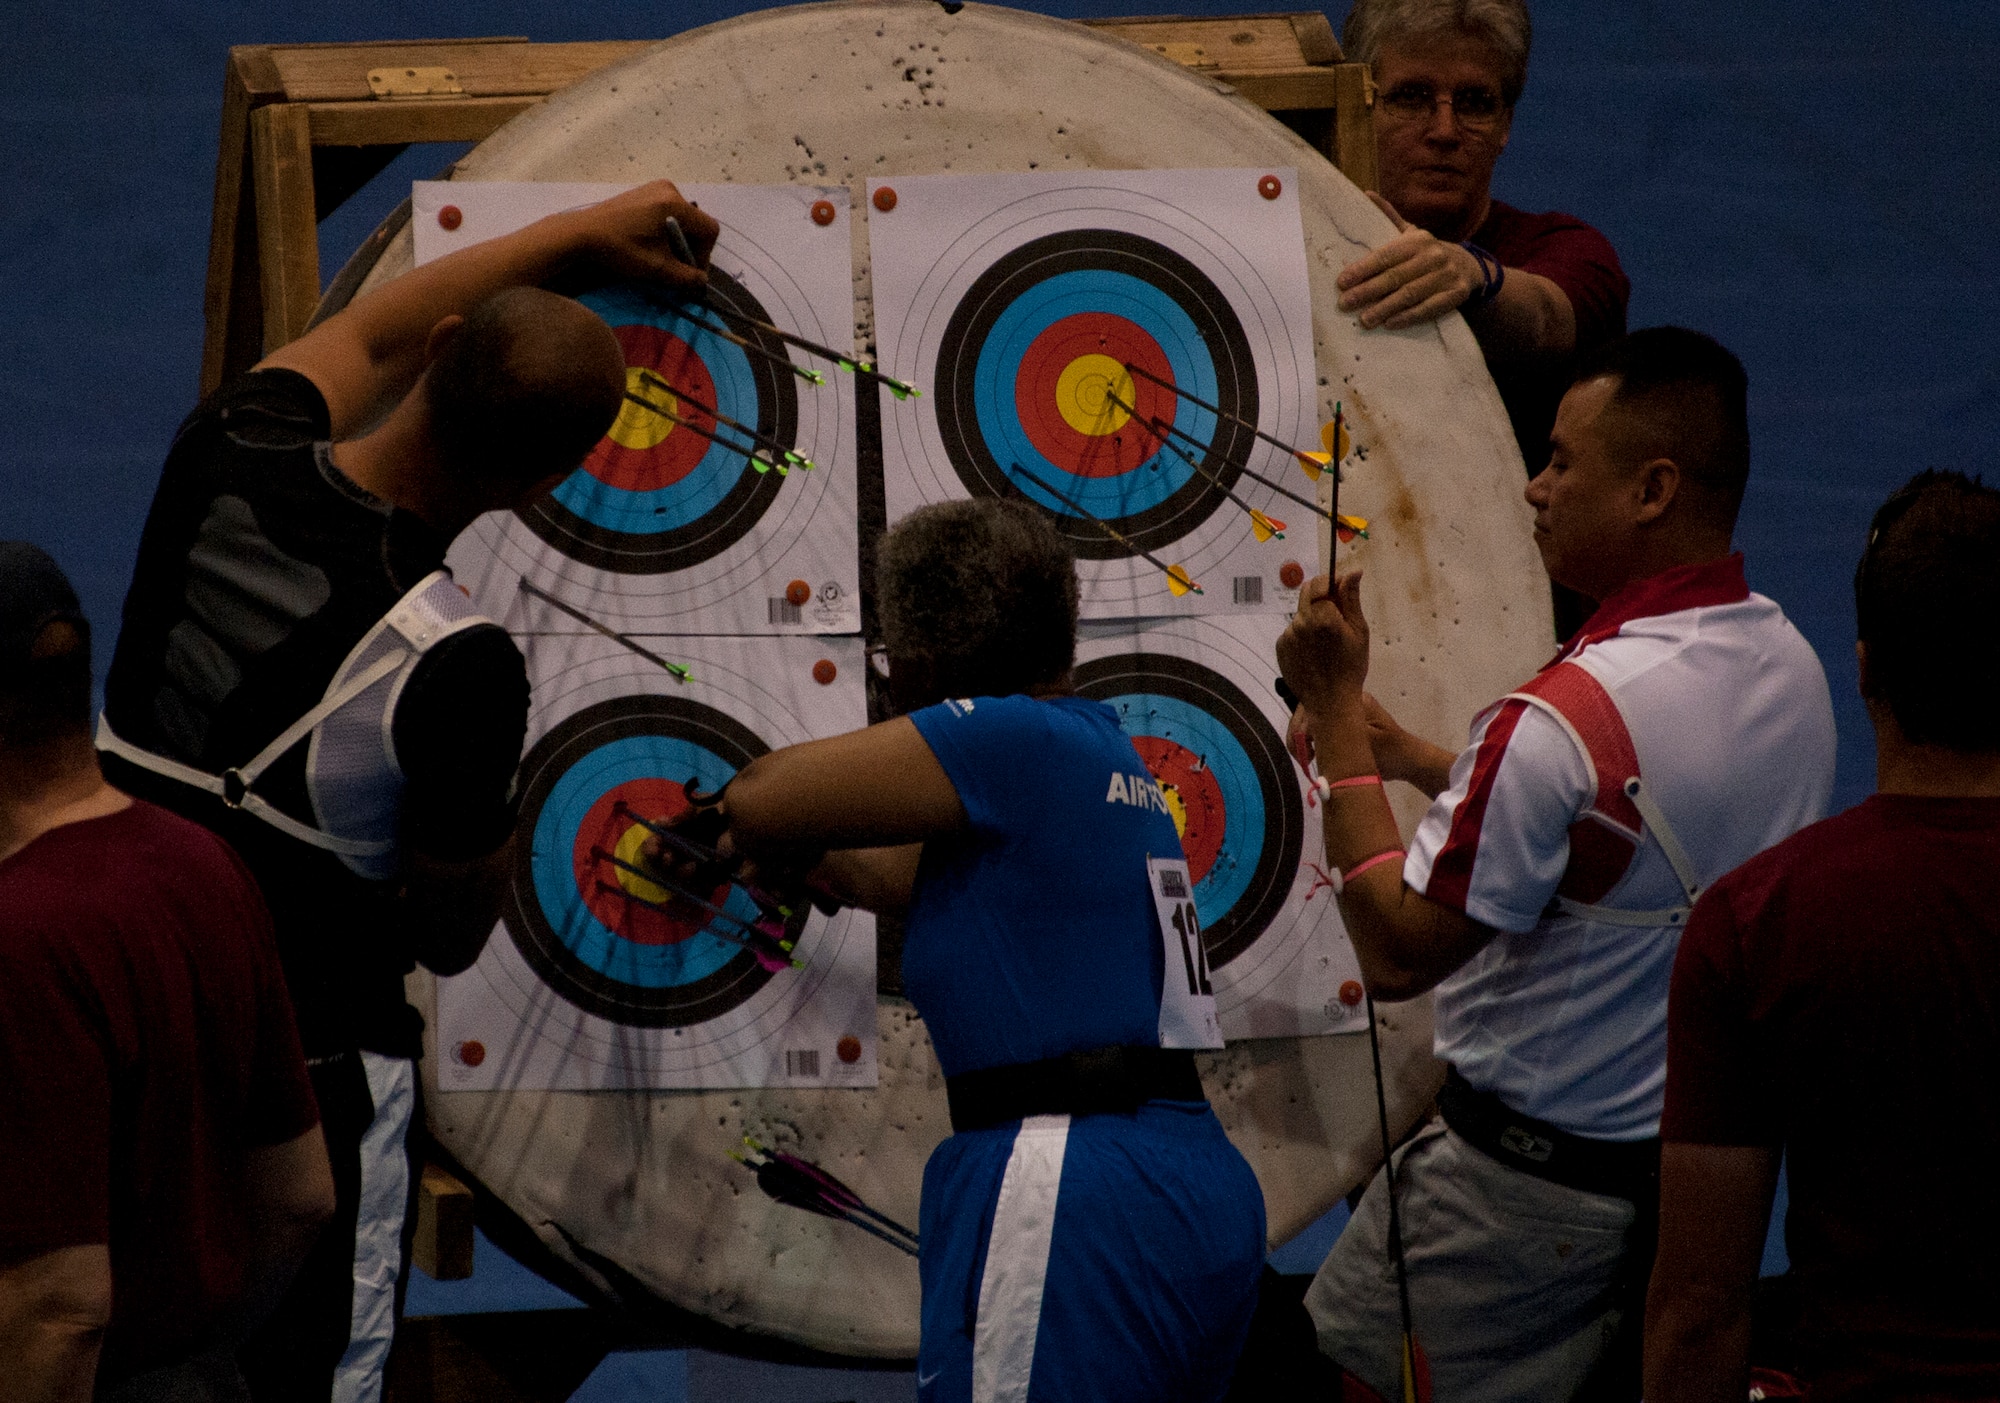 Gwen Sheppard (center) removes the arrows from her target during the archery competition of the 2012 Warrior Games at the U.S. Air Force Academy in Colorado Springs, Colo., May 2, 2012. Sheppard is with the Air Force team. (U.S. Air Force photo/Val Gempis) 